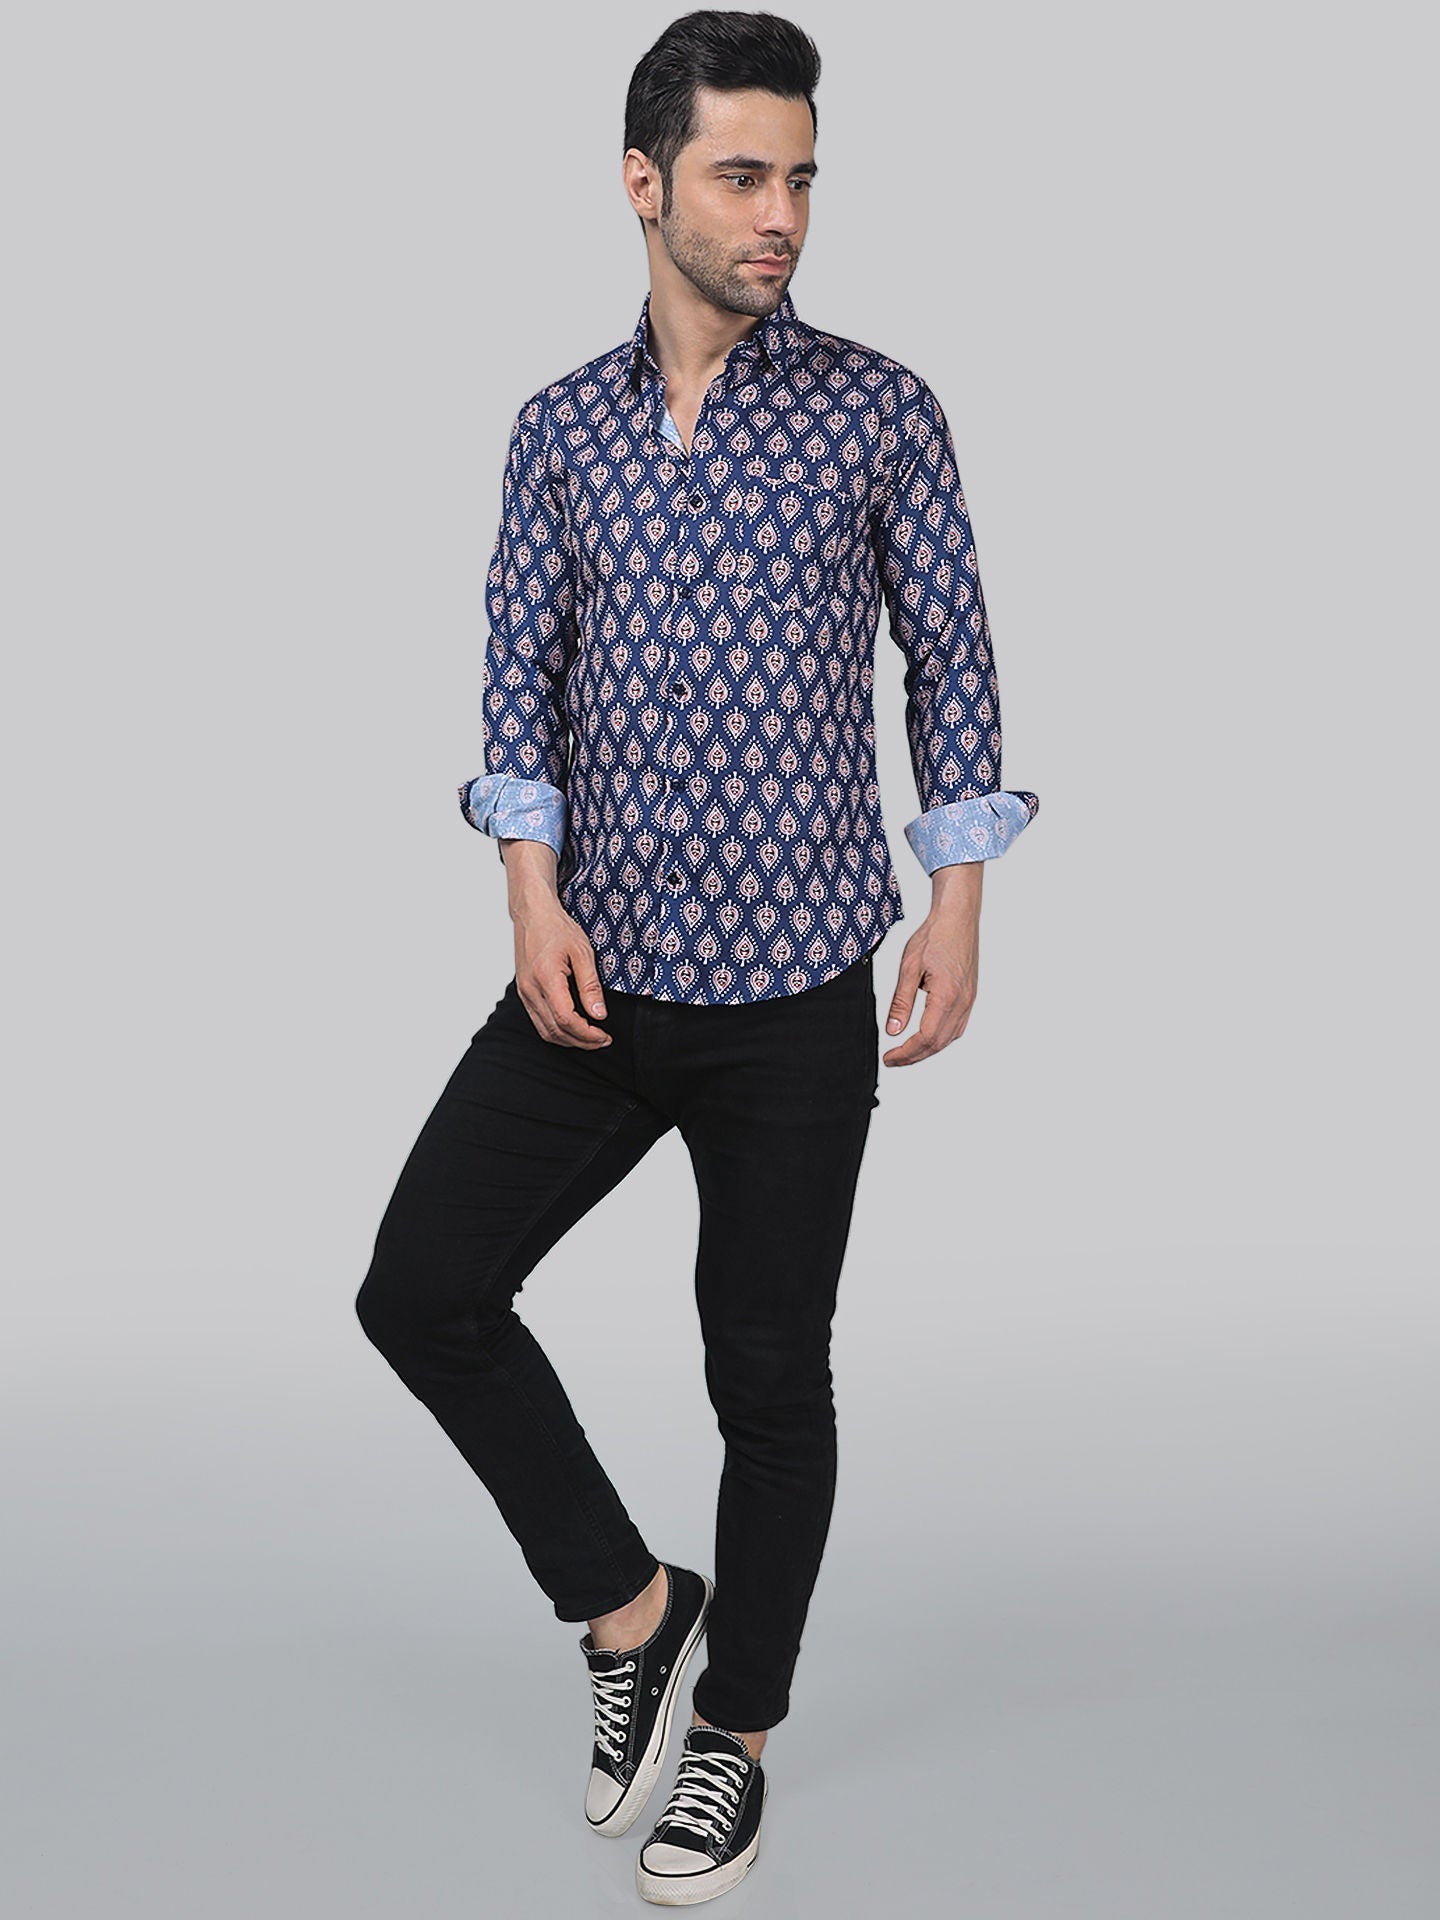 Majestic Marble Men's Printed Full Sleeve Casual Linen Shirt - TryBuy® USA🇺🇸